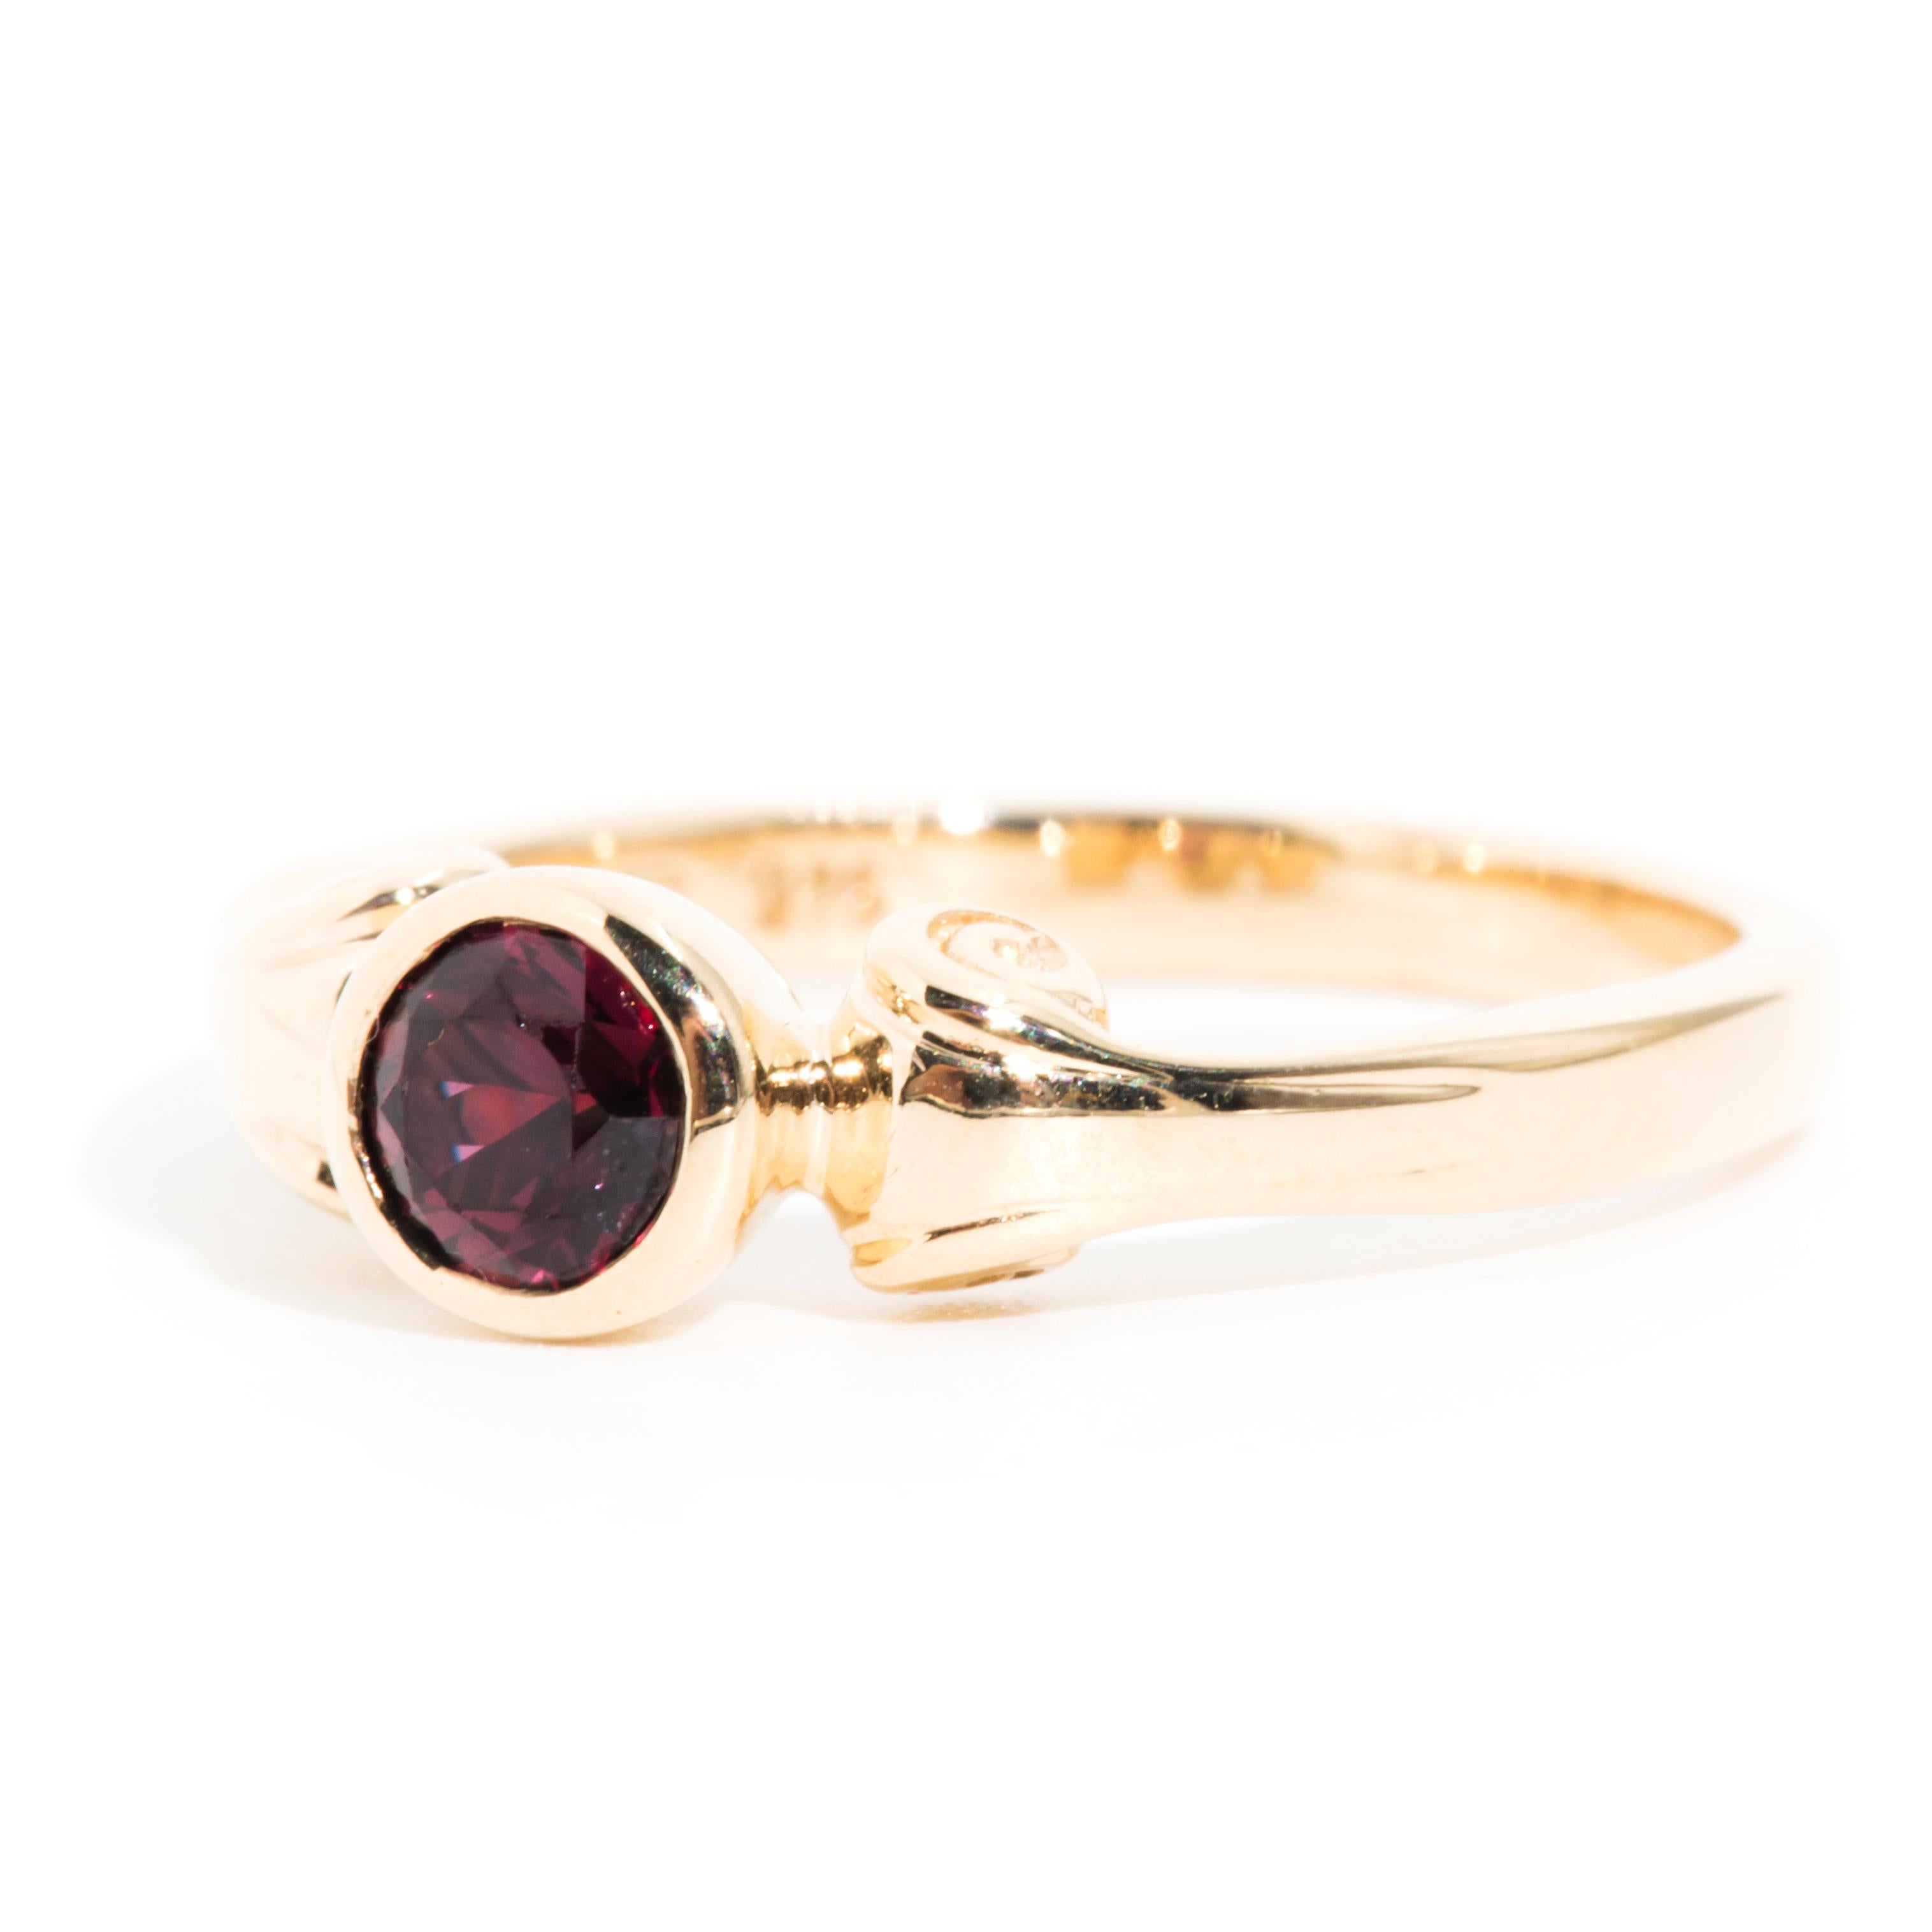 Crafted in 9 carat yellow gold, this lovely vintage adornment features a gorgeous deep red ruby encased in a bezel setting atop a nostalgic scrolled gold band. We have named this charming vintage solitaire ring The Aaliyah Ring.  The Aaliyah Ring